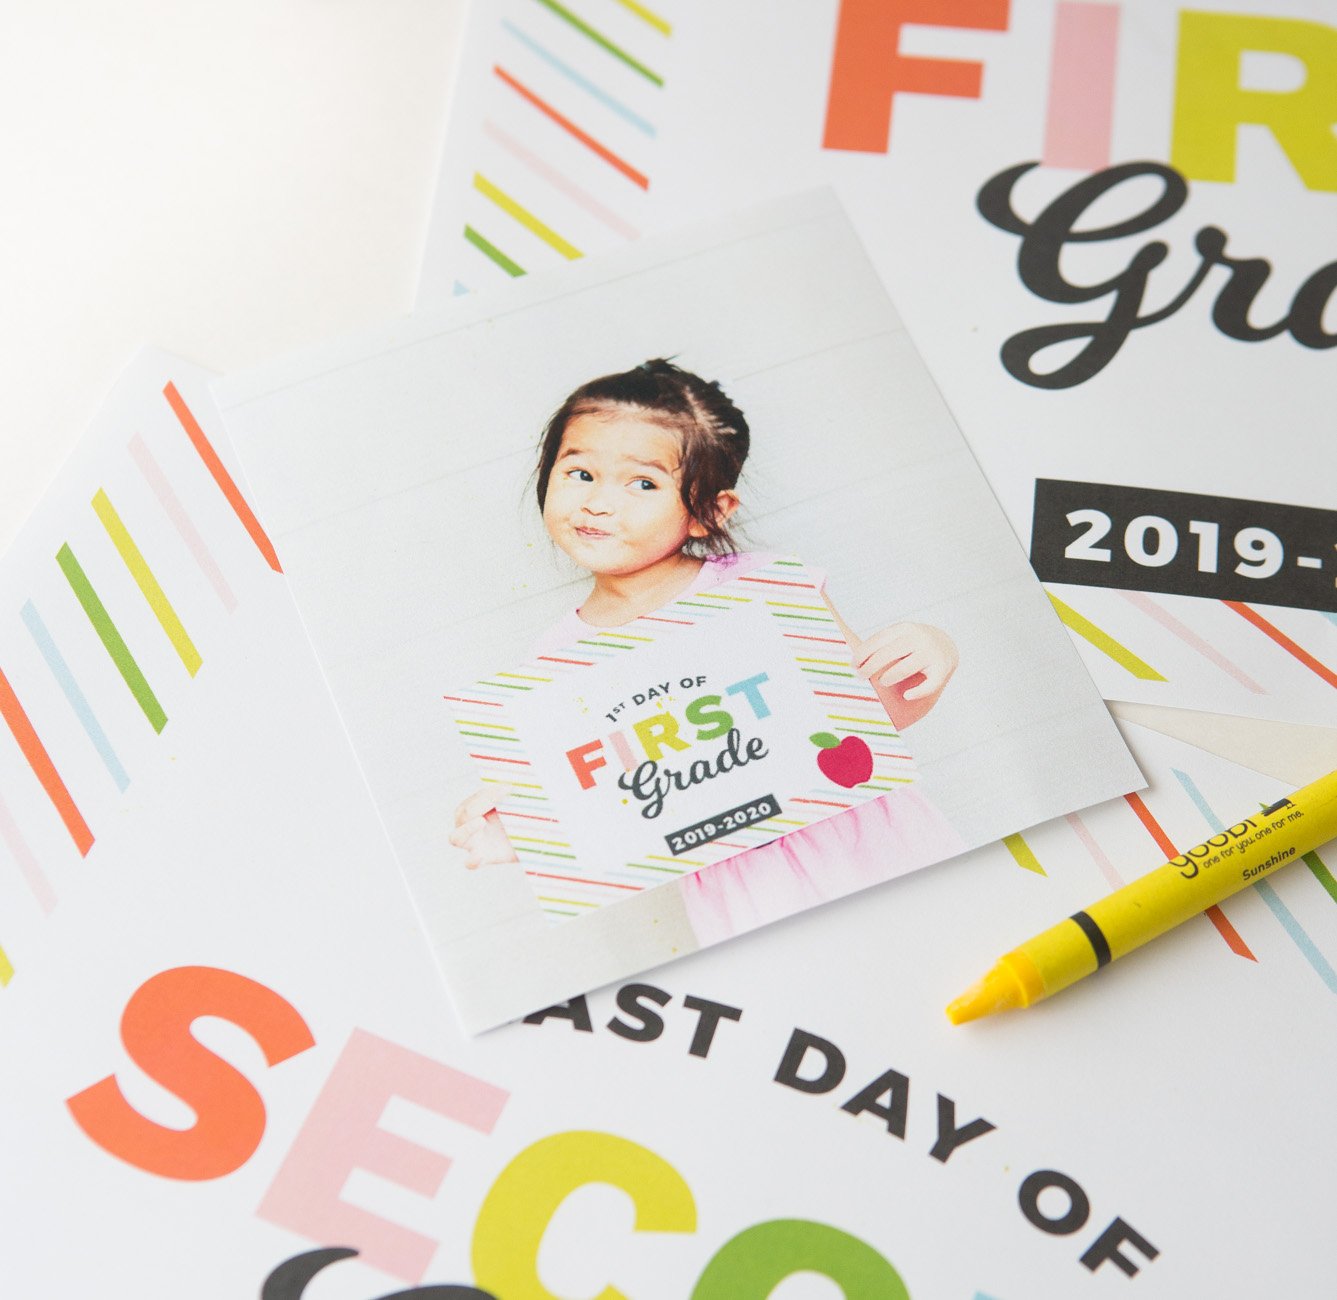 Free Printable Back to School Signs Colorful Pre-K to 12th Grade, 2019-2020